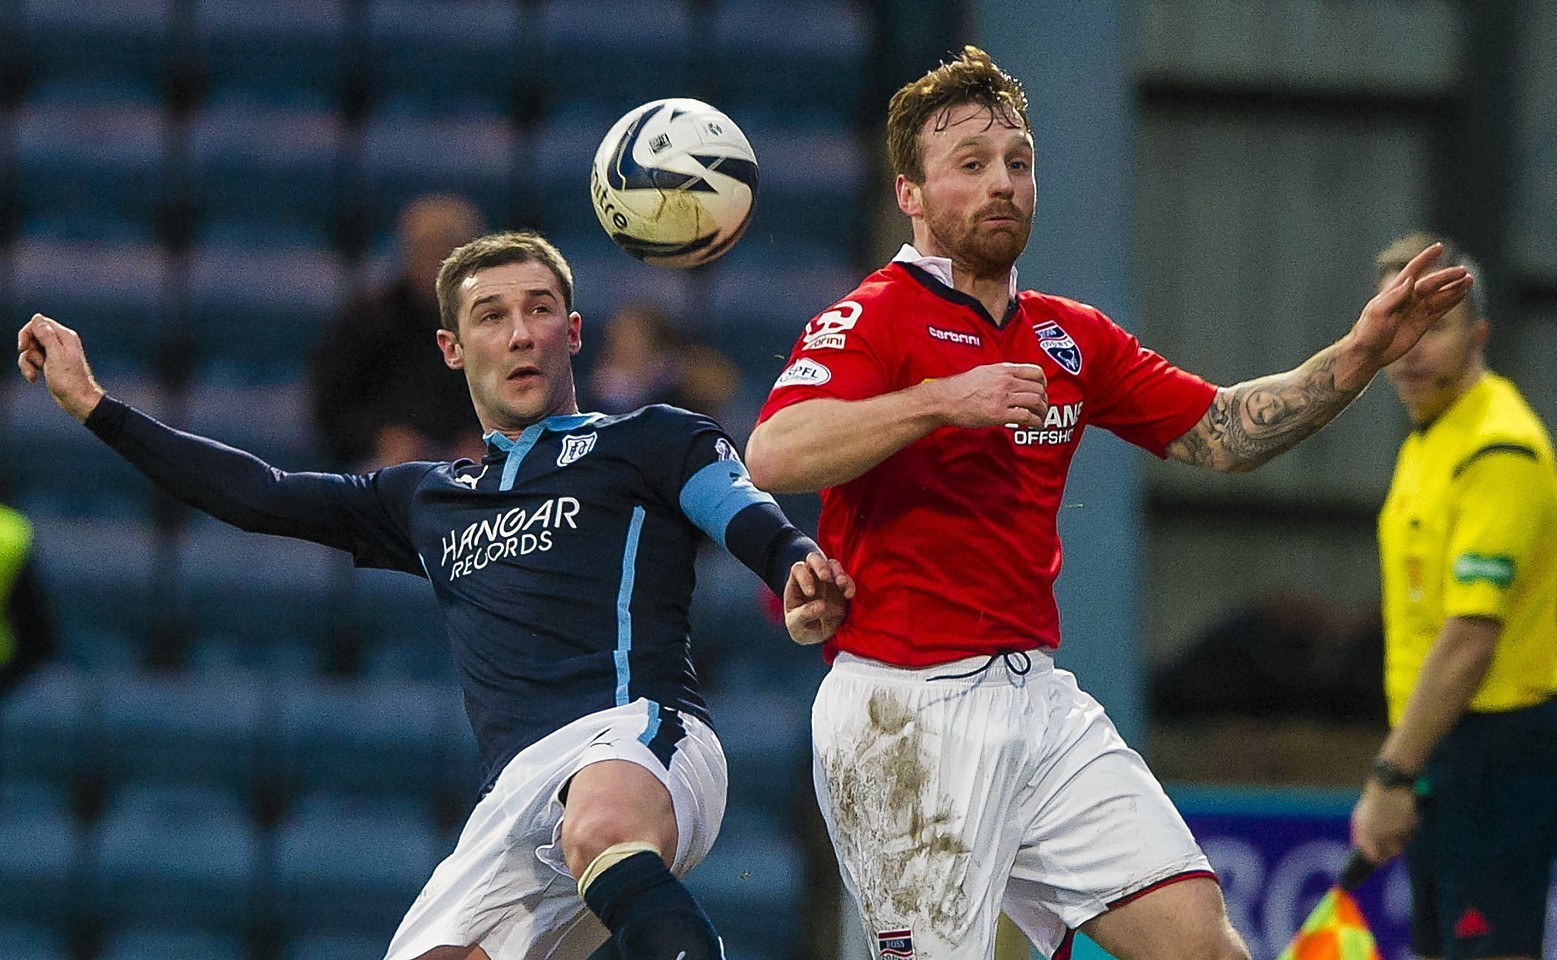 Kevin Thomson and Craig Curran challenge for the ball when the teams met earlier this season